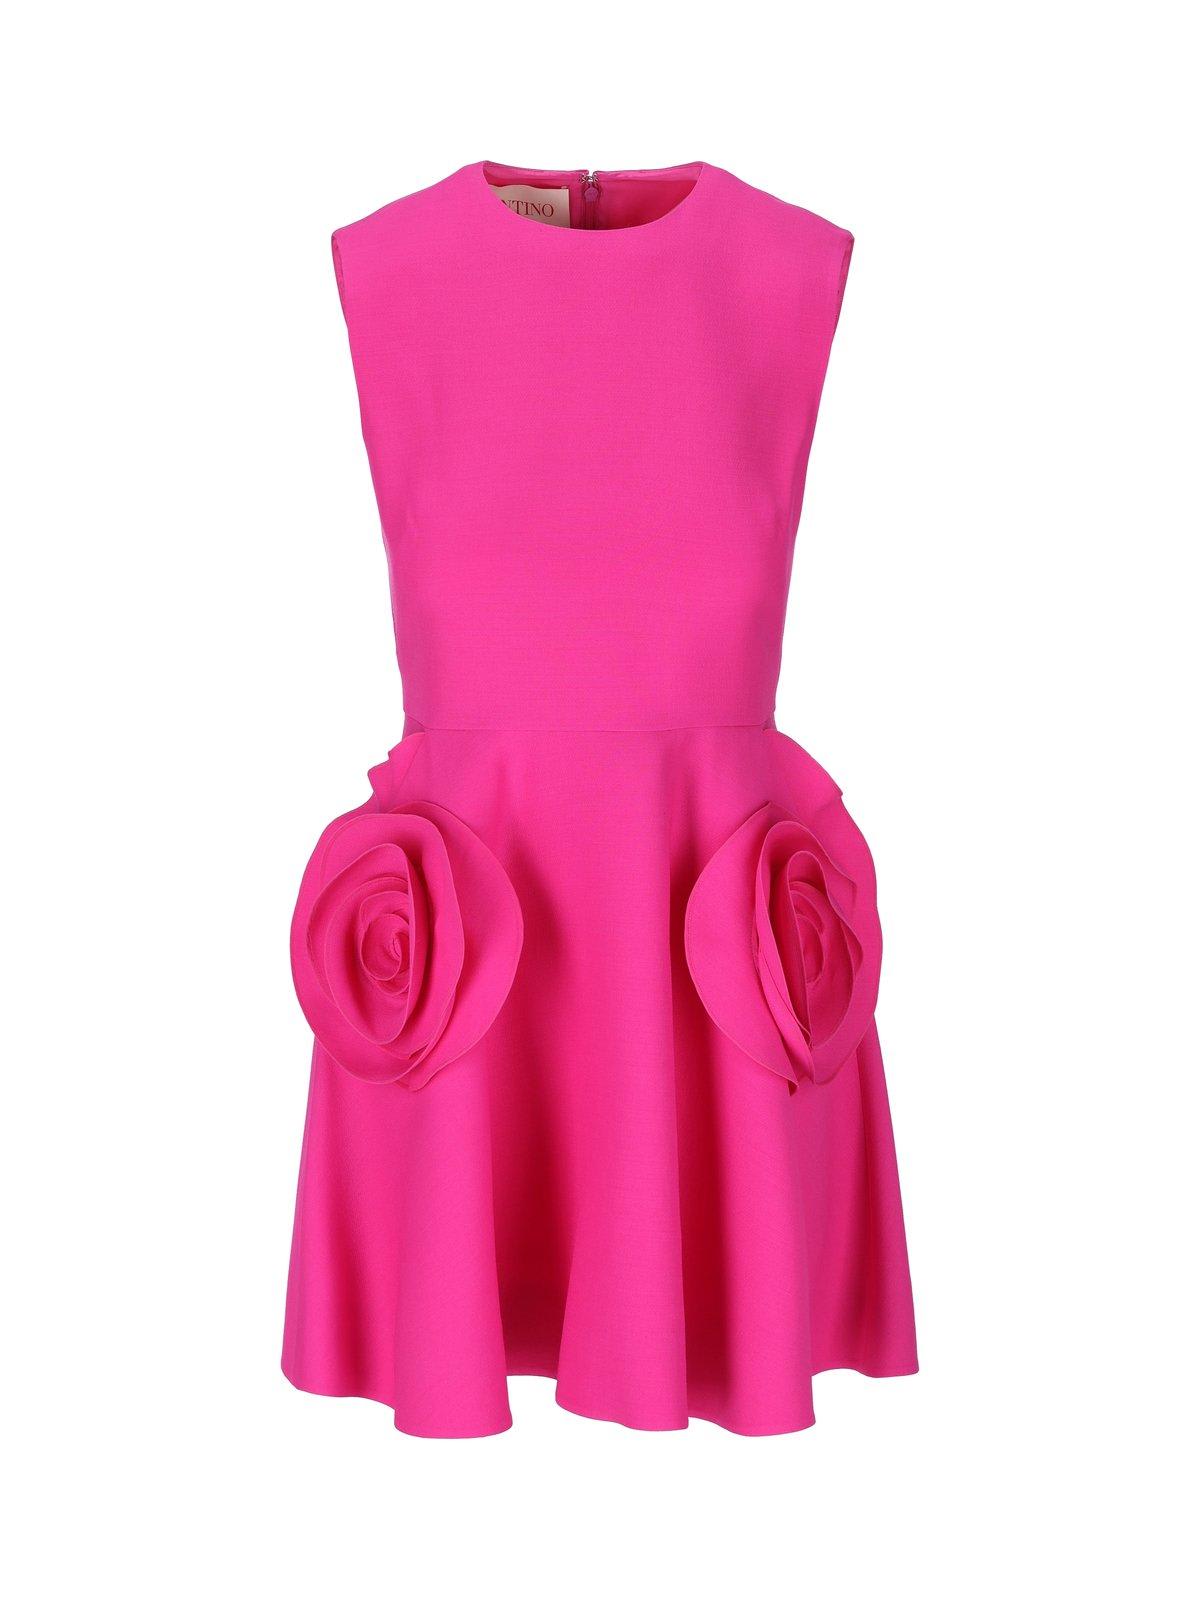 Valentino Floral Embellished Crewneck Dress In Fucsia